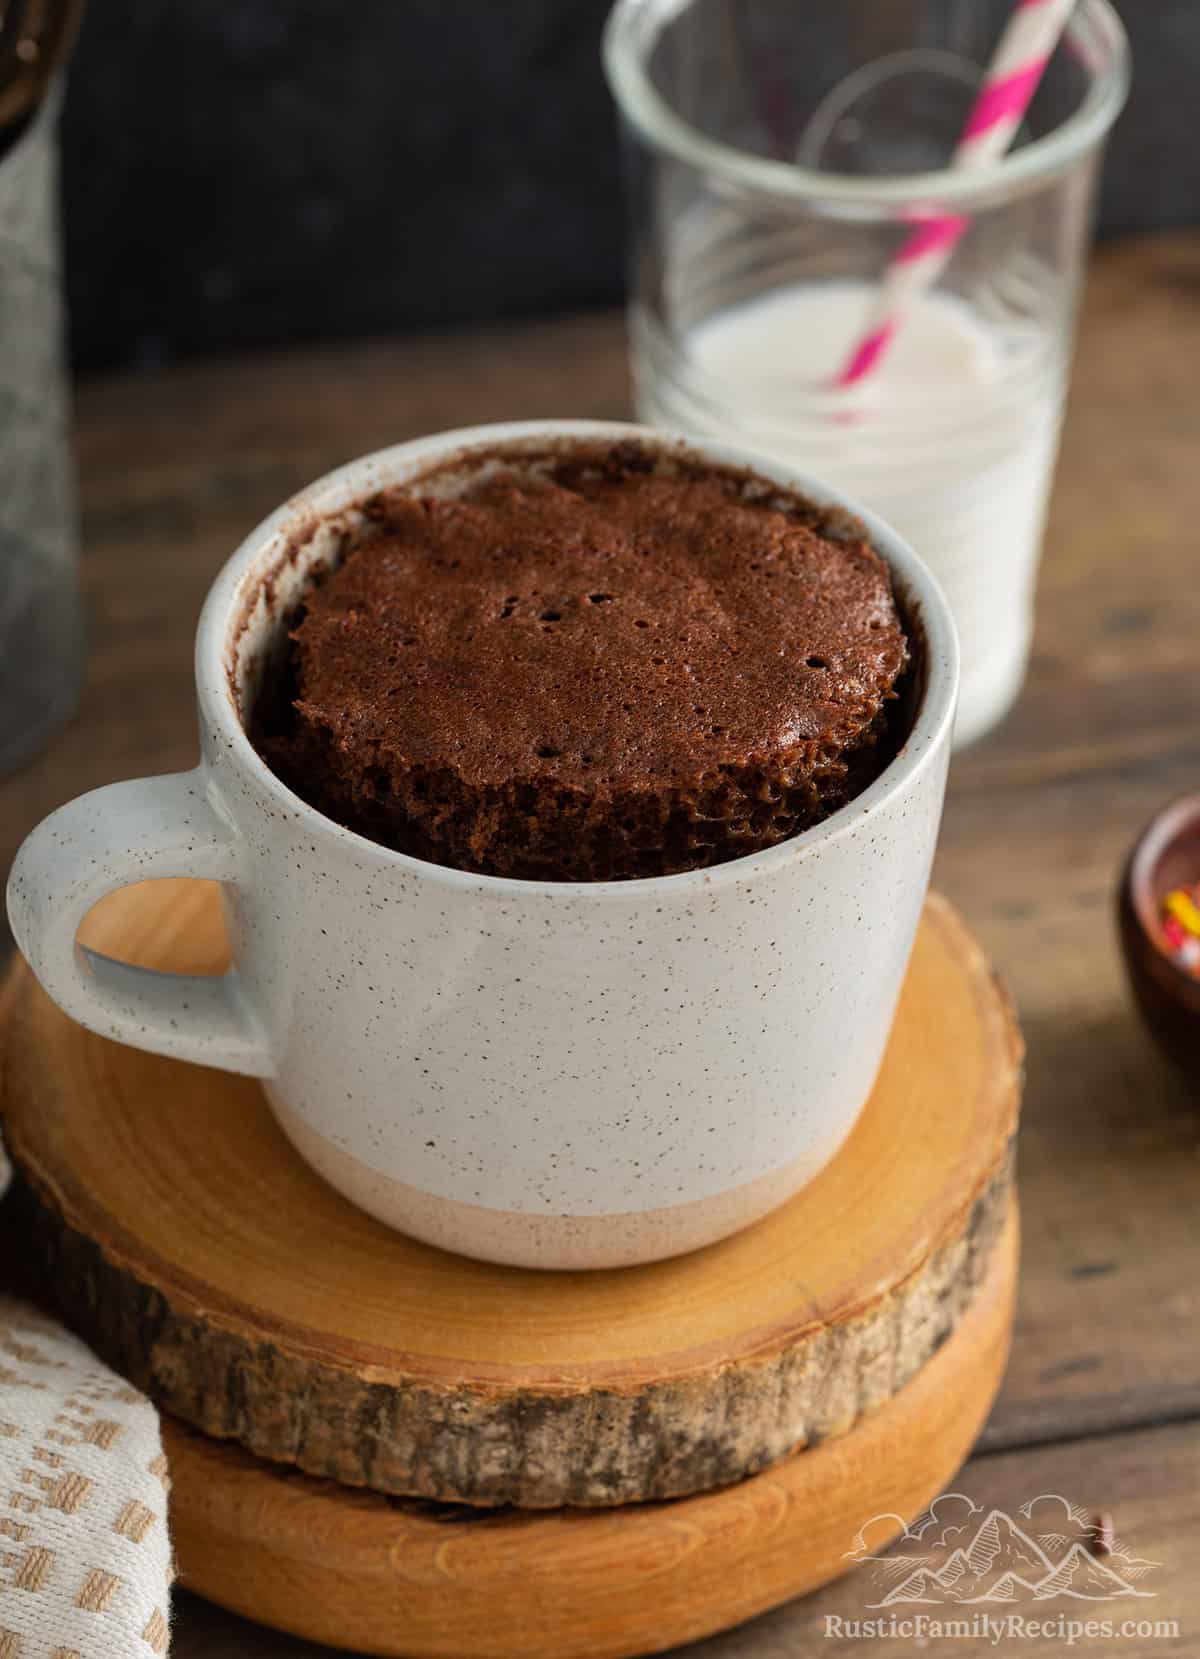 Chocolate cake in a mug on top of wooden slabs